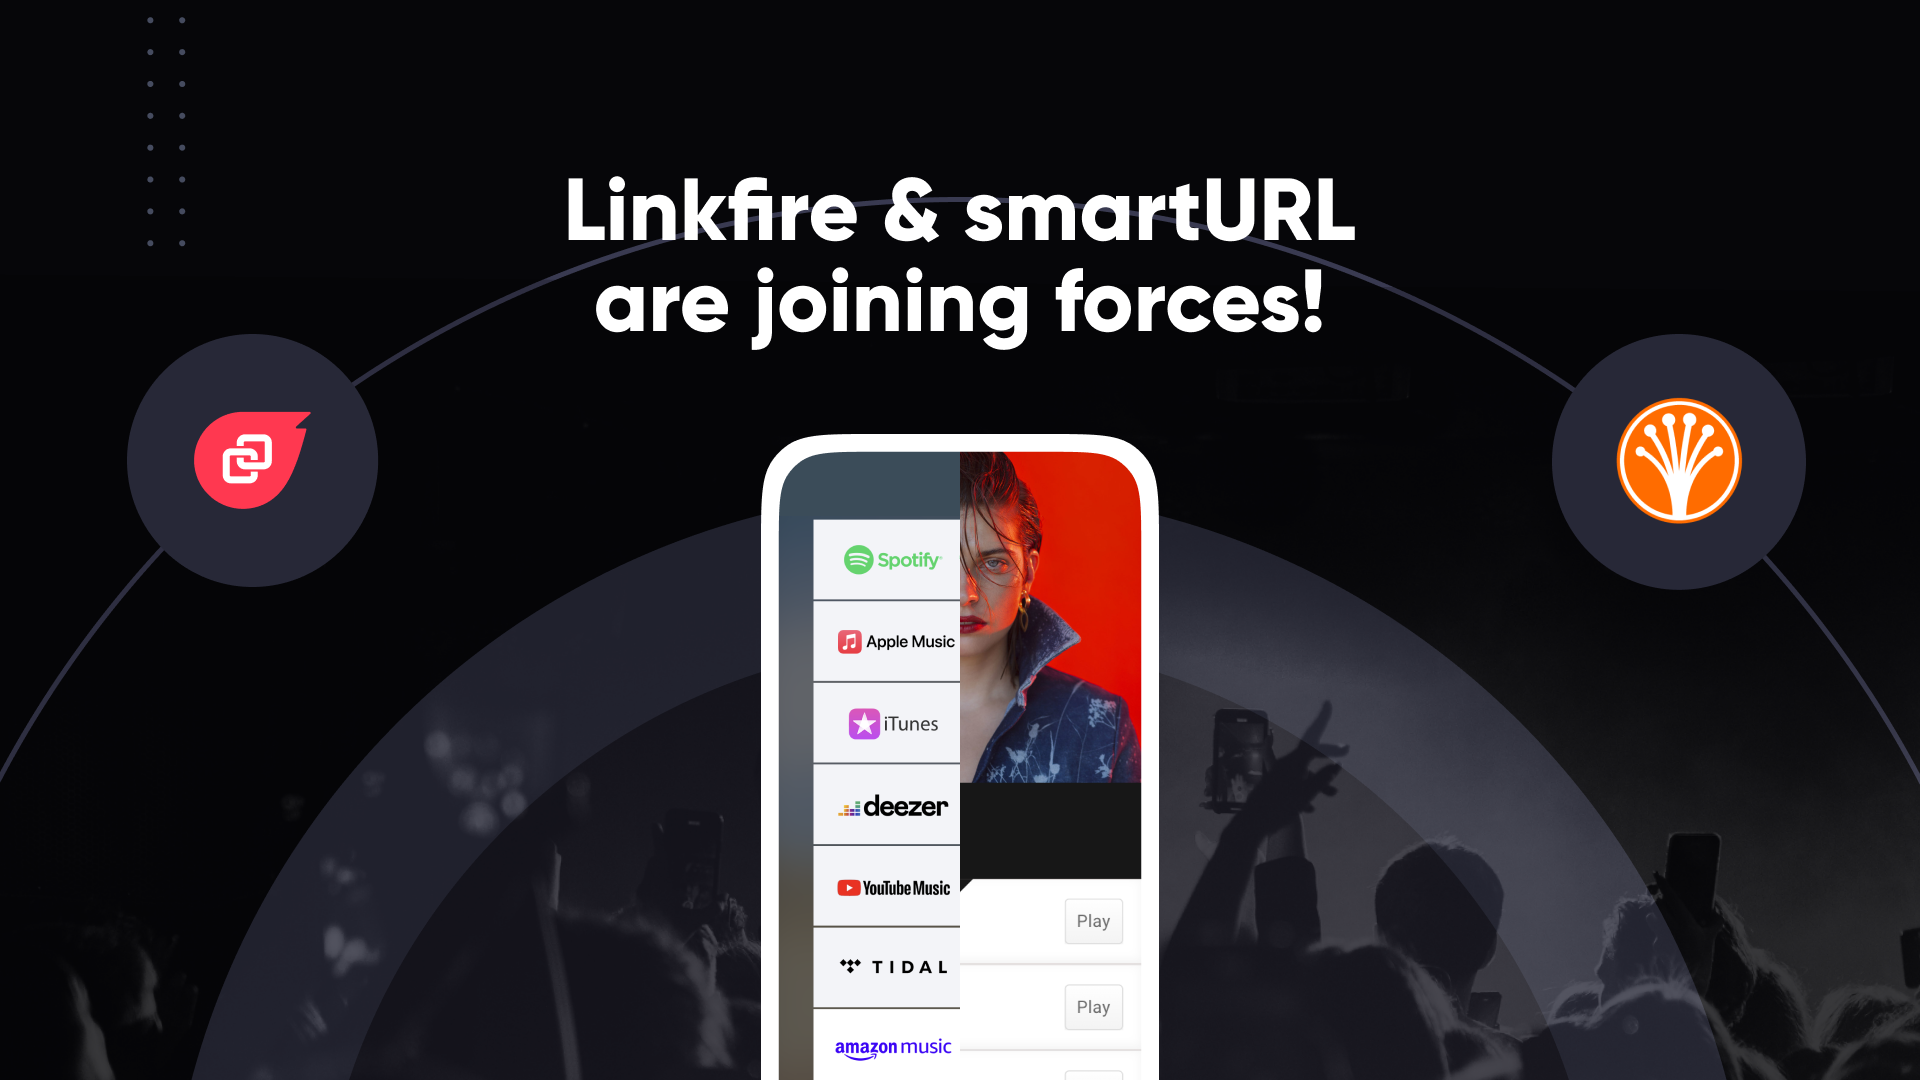 Linkfire acquired smartURL. What now?